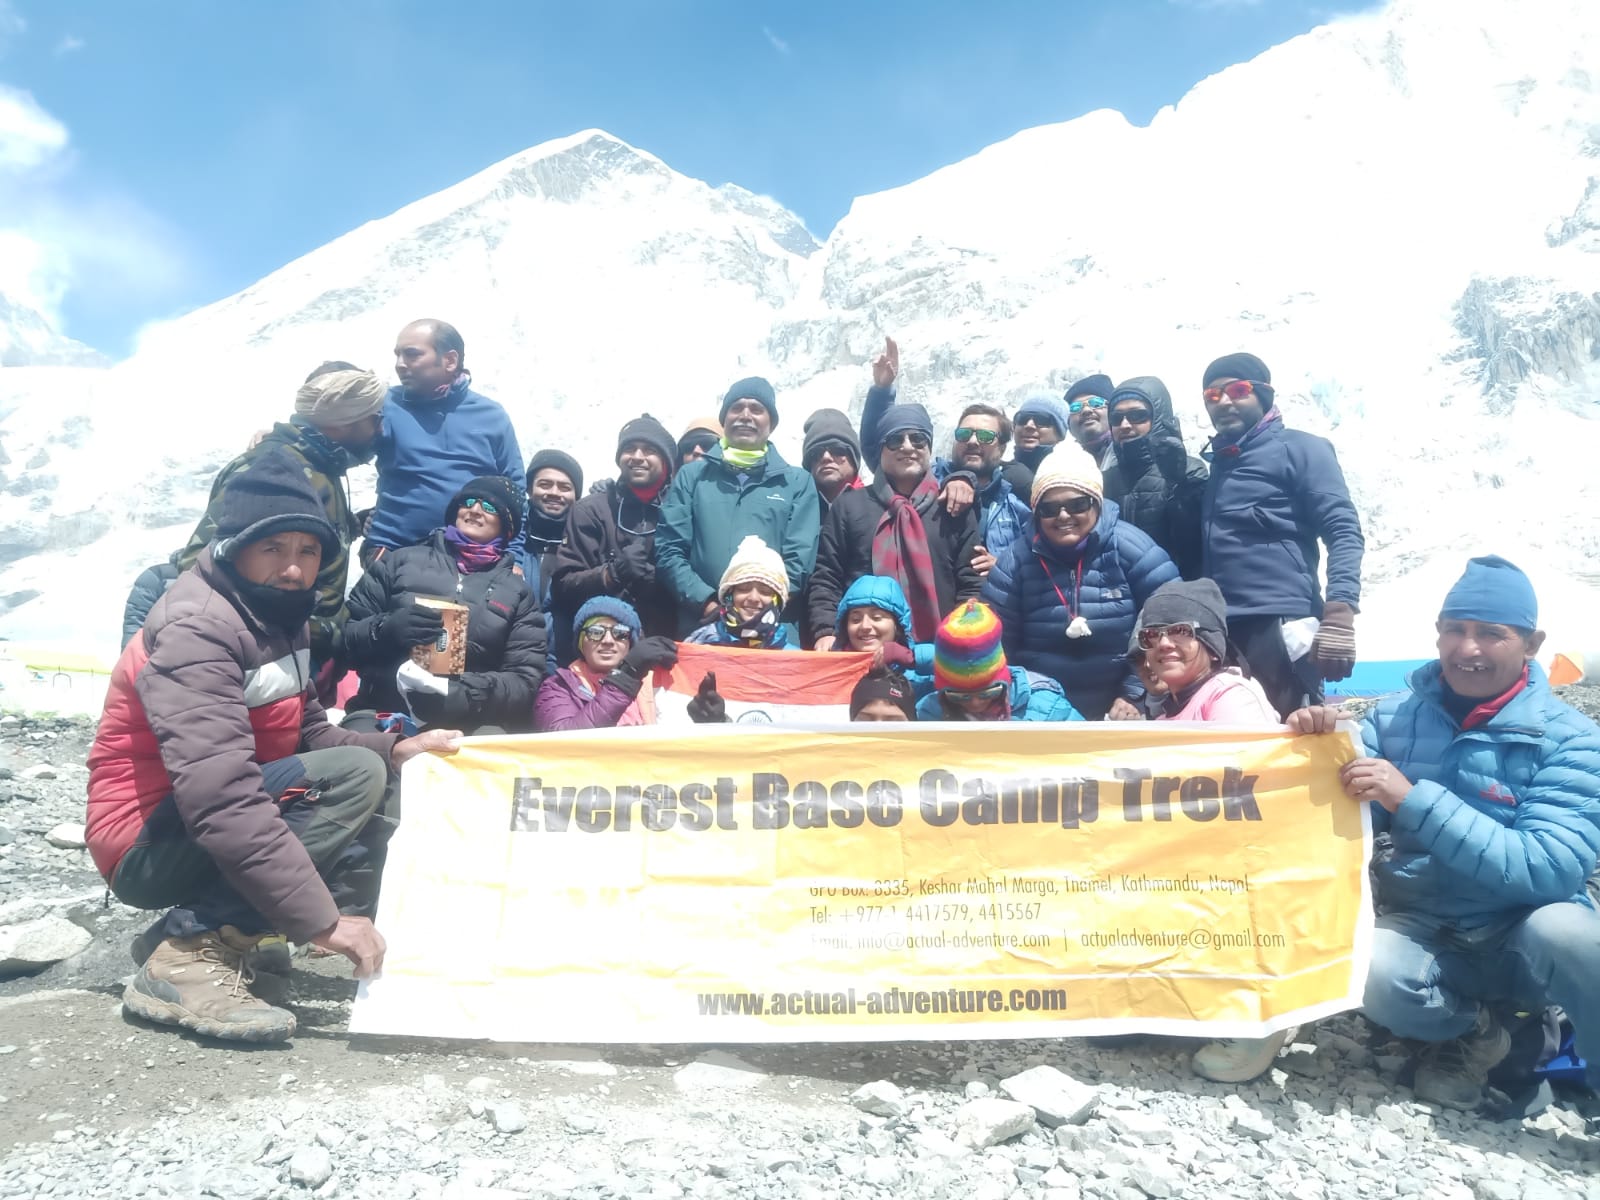 What is the total cost of Everest Base Camp Trek?